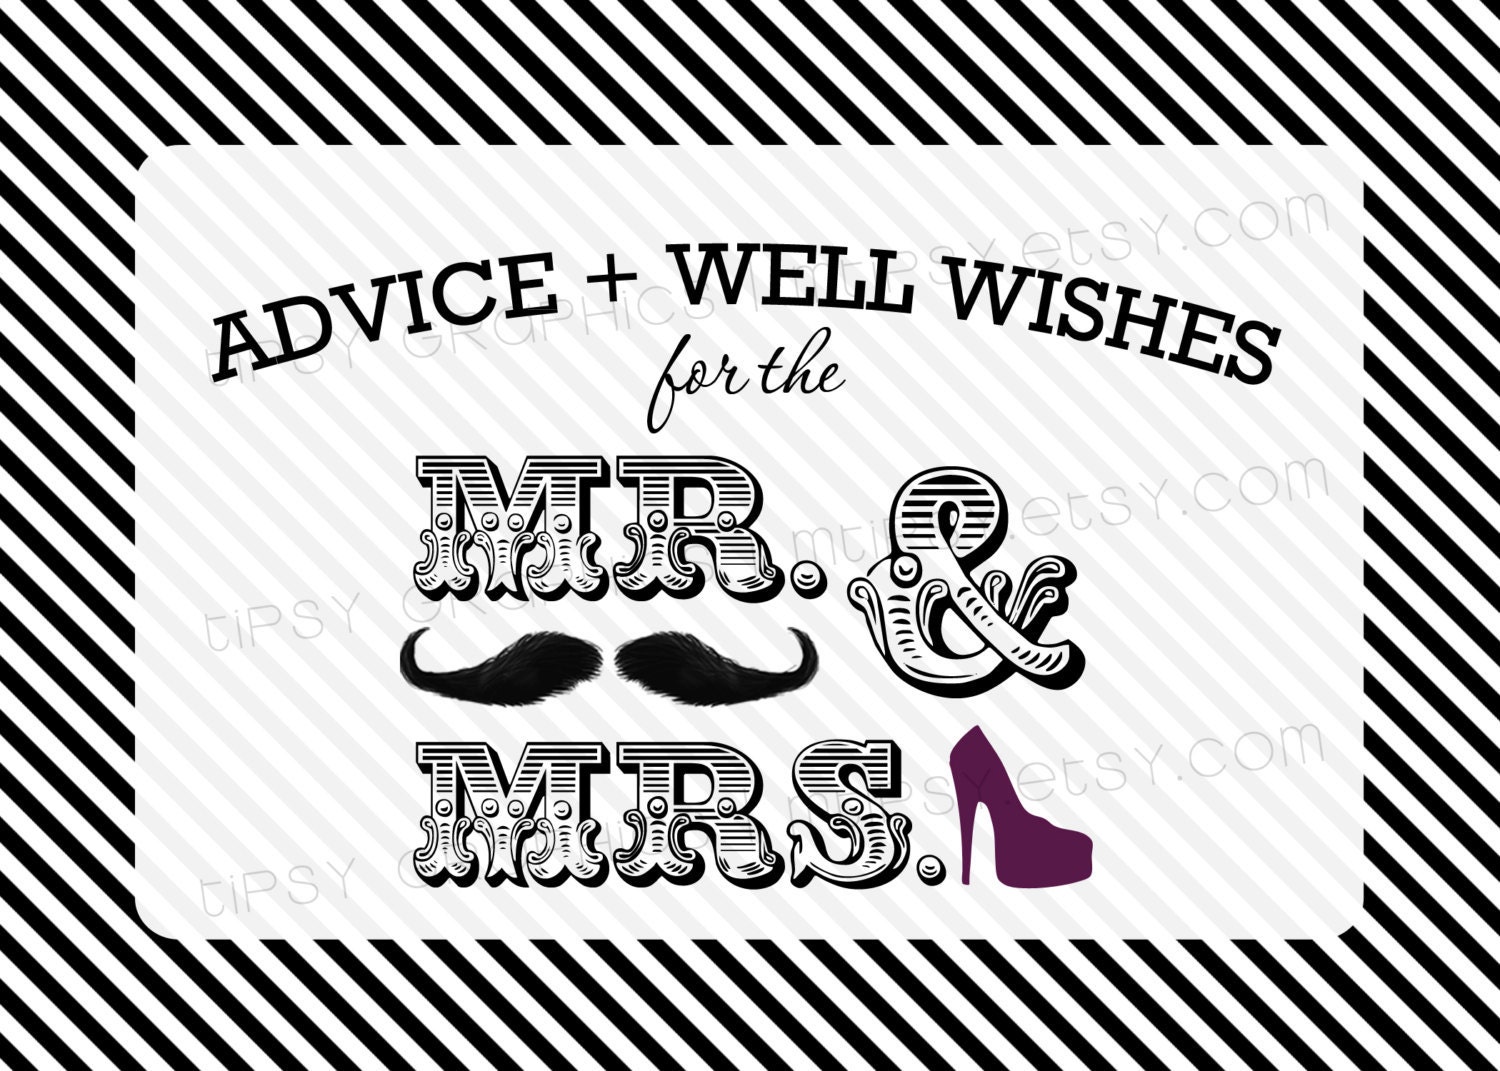 advice-and-well-wishes-for-the-mr-mrs-mustache-and-high